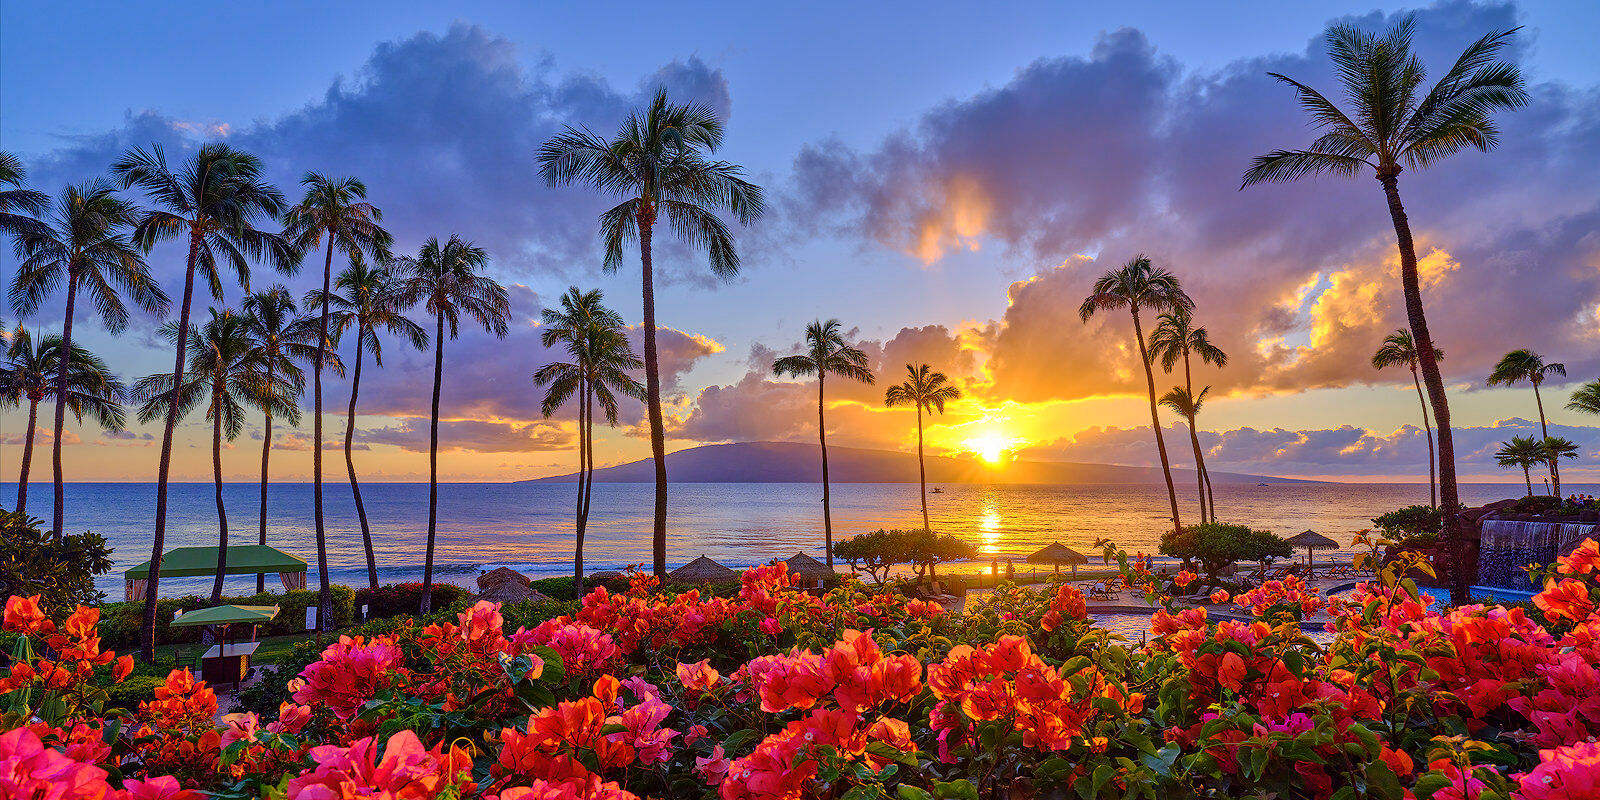 A very beautiful sunset at kaanapali beach with coconut palms and bright red flowers in the flowers in the foregound with the island of Lanai in the background